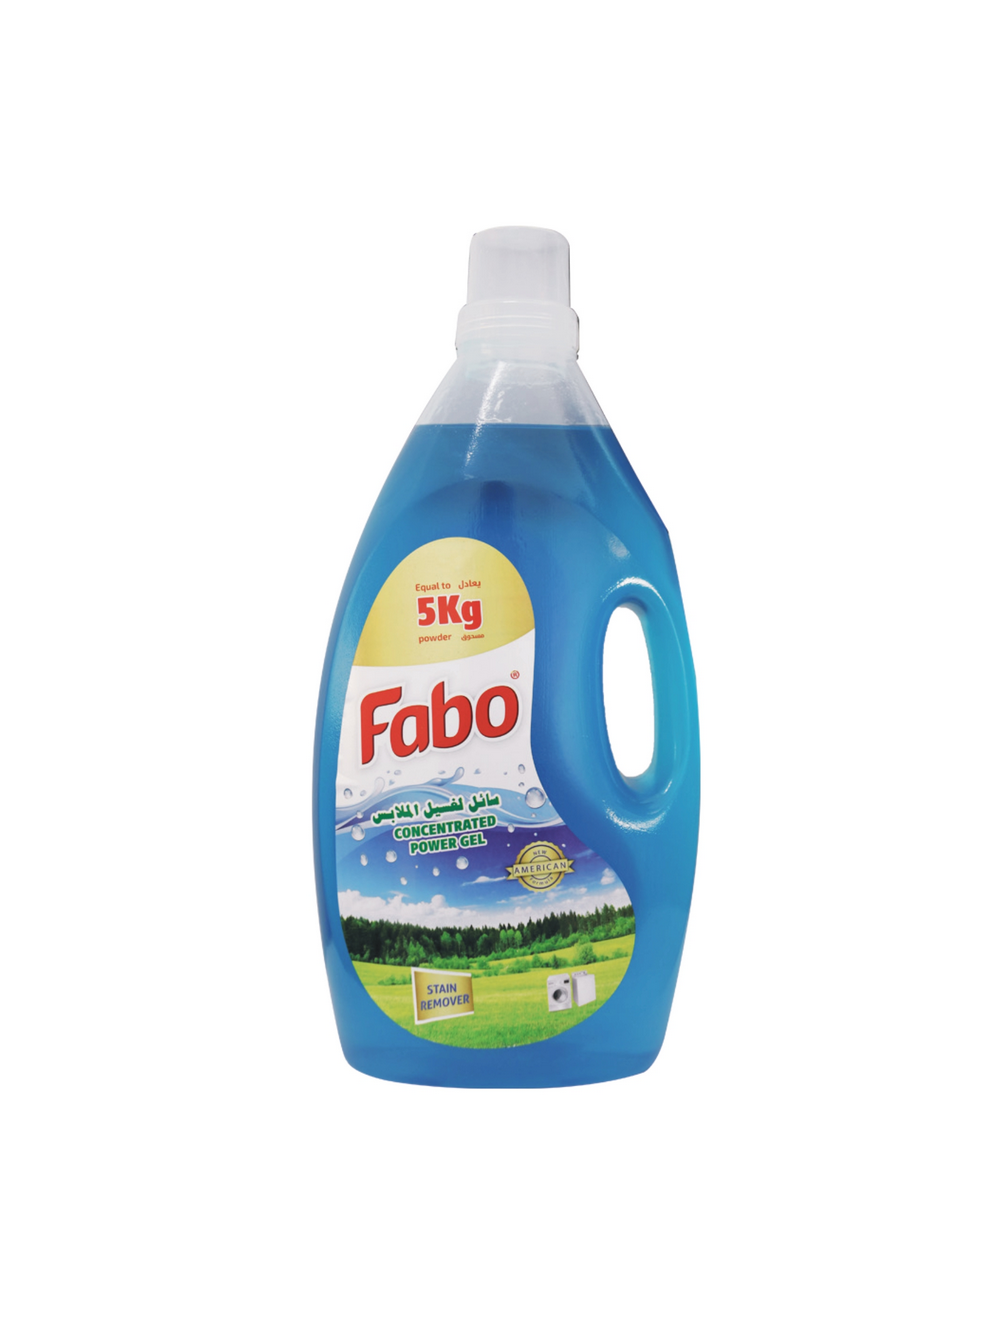 fabo-products_page-0044